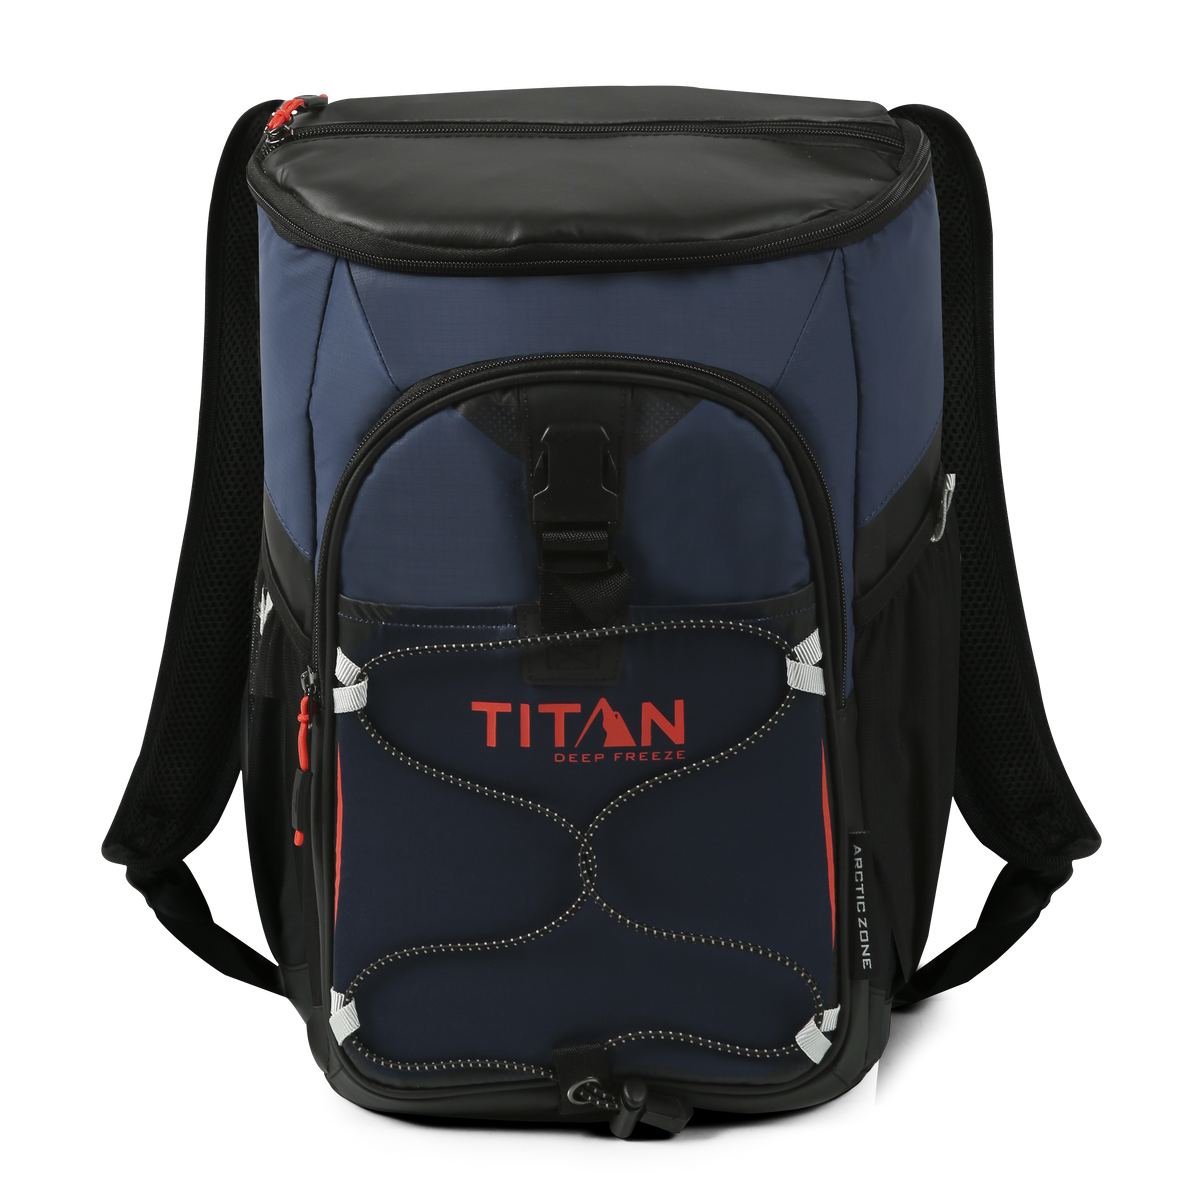 Backpack Coolers, Insulated Backpacks